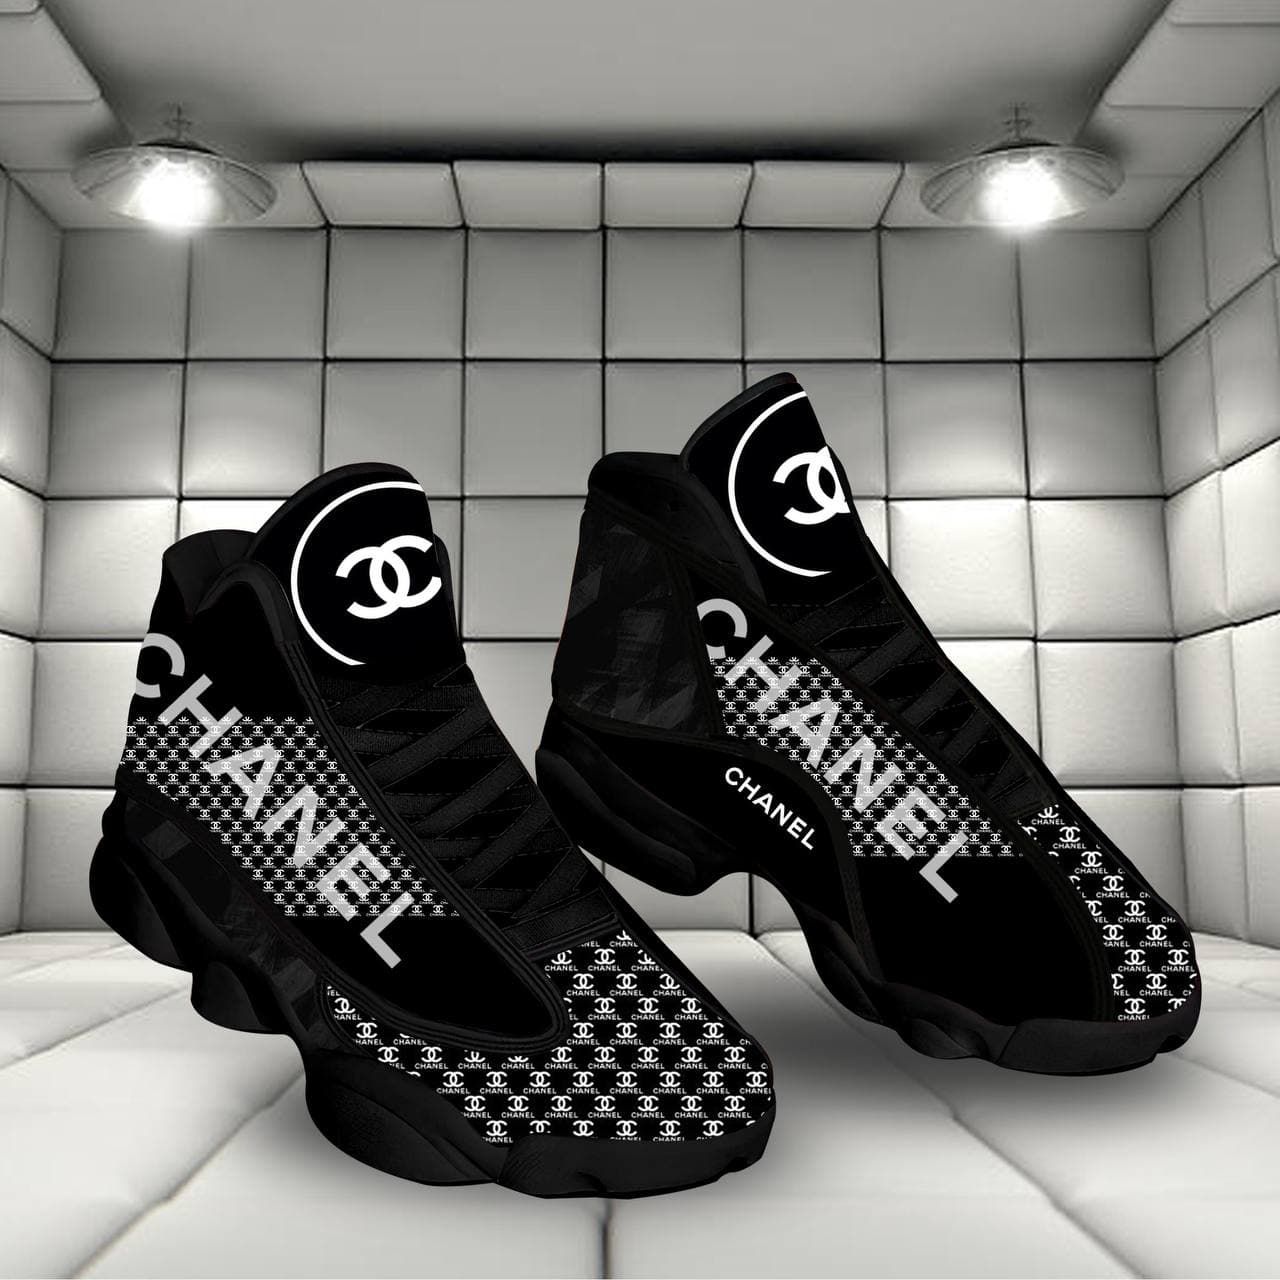 Chanel luxury air jordan 13 sneaker shoes – LIMITED EDTION